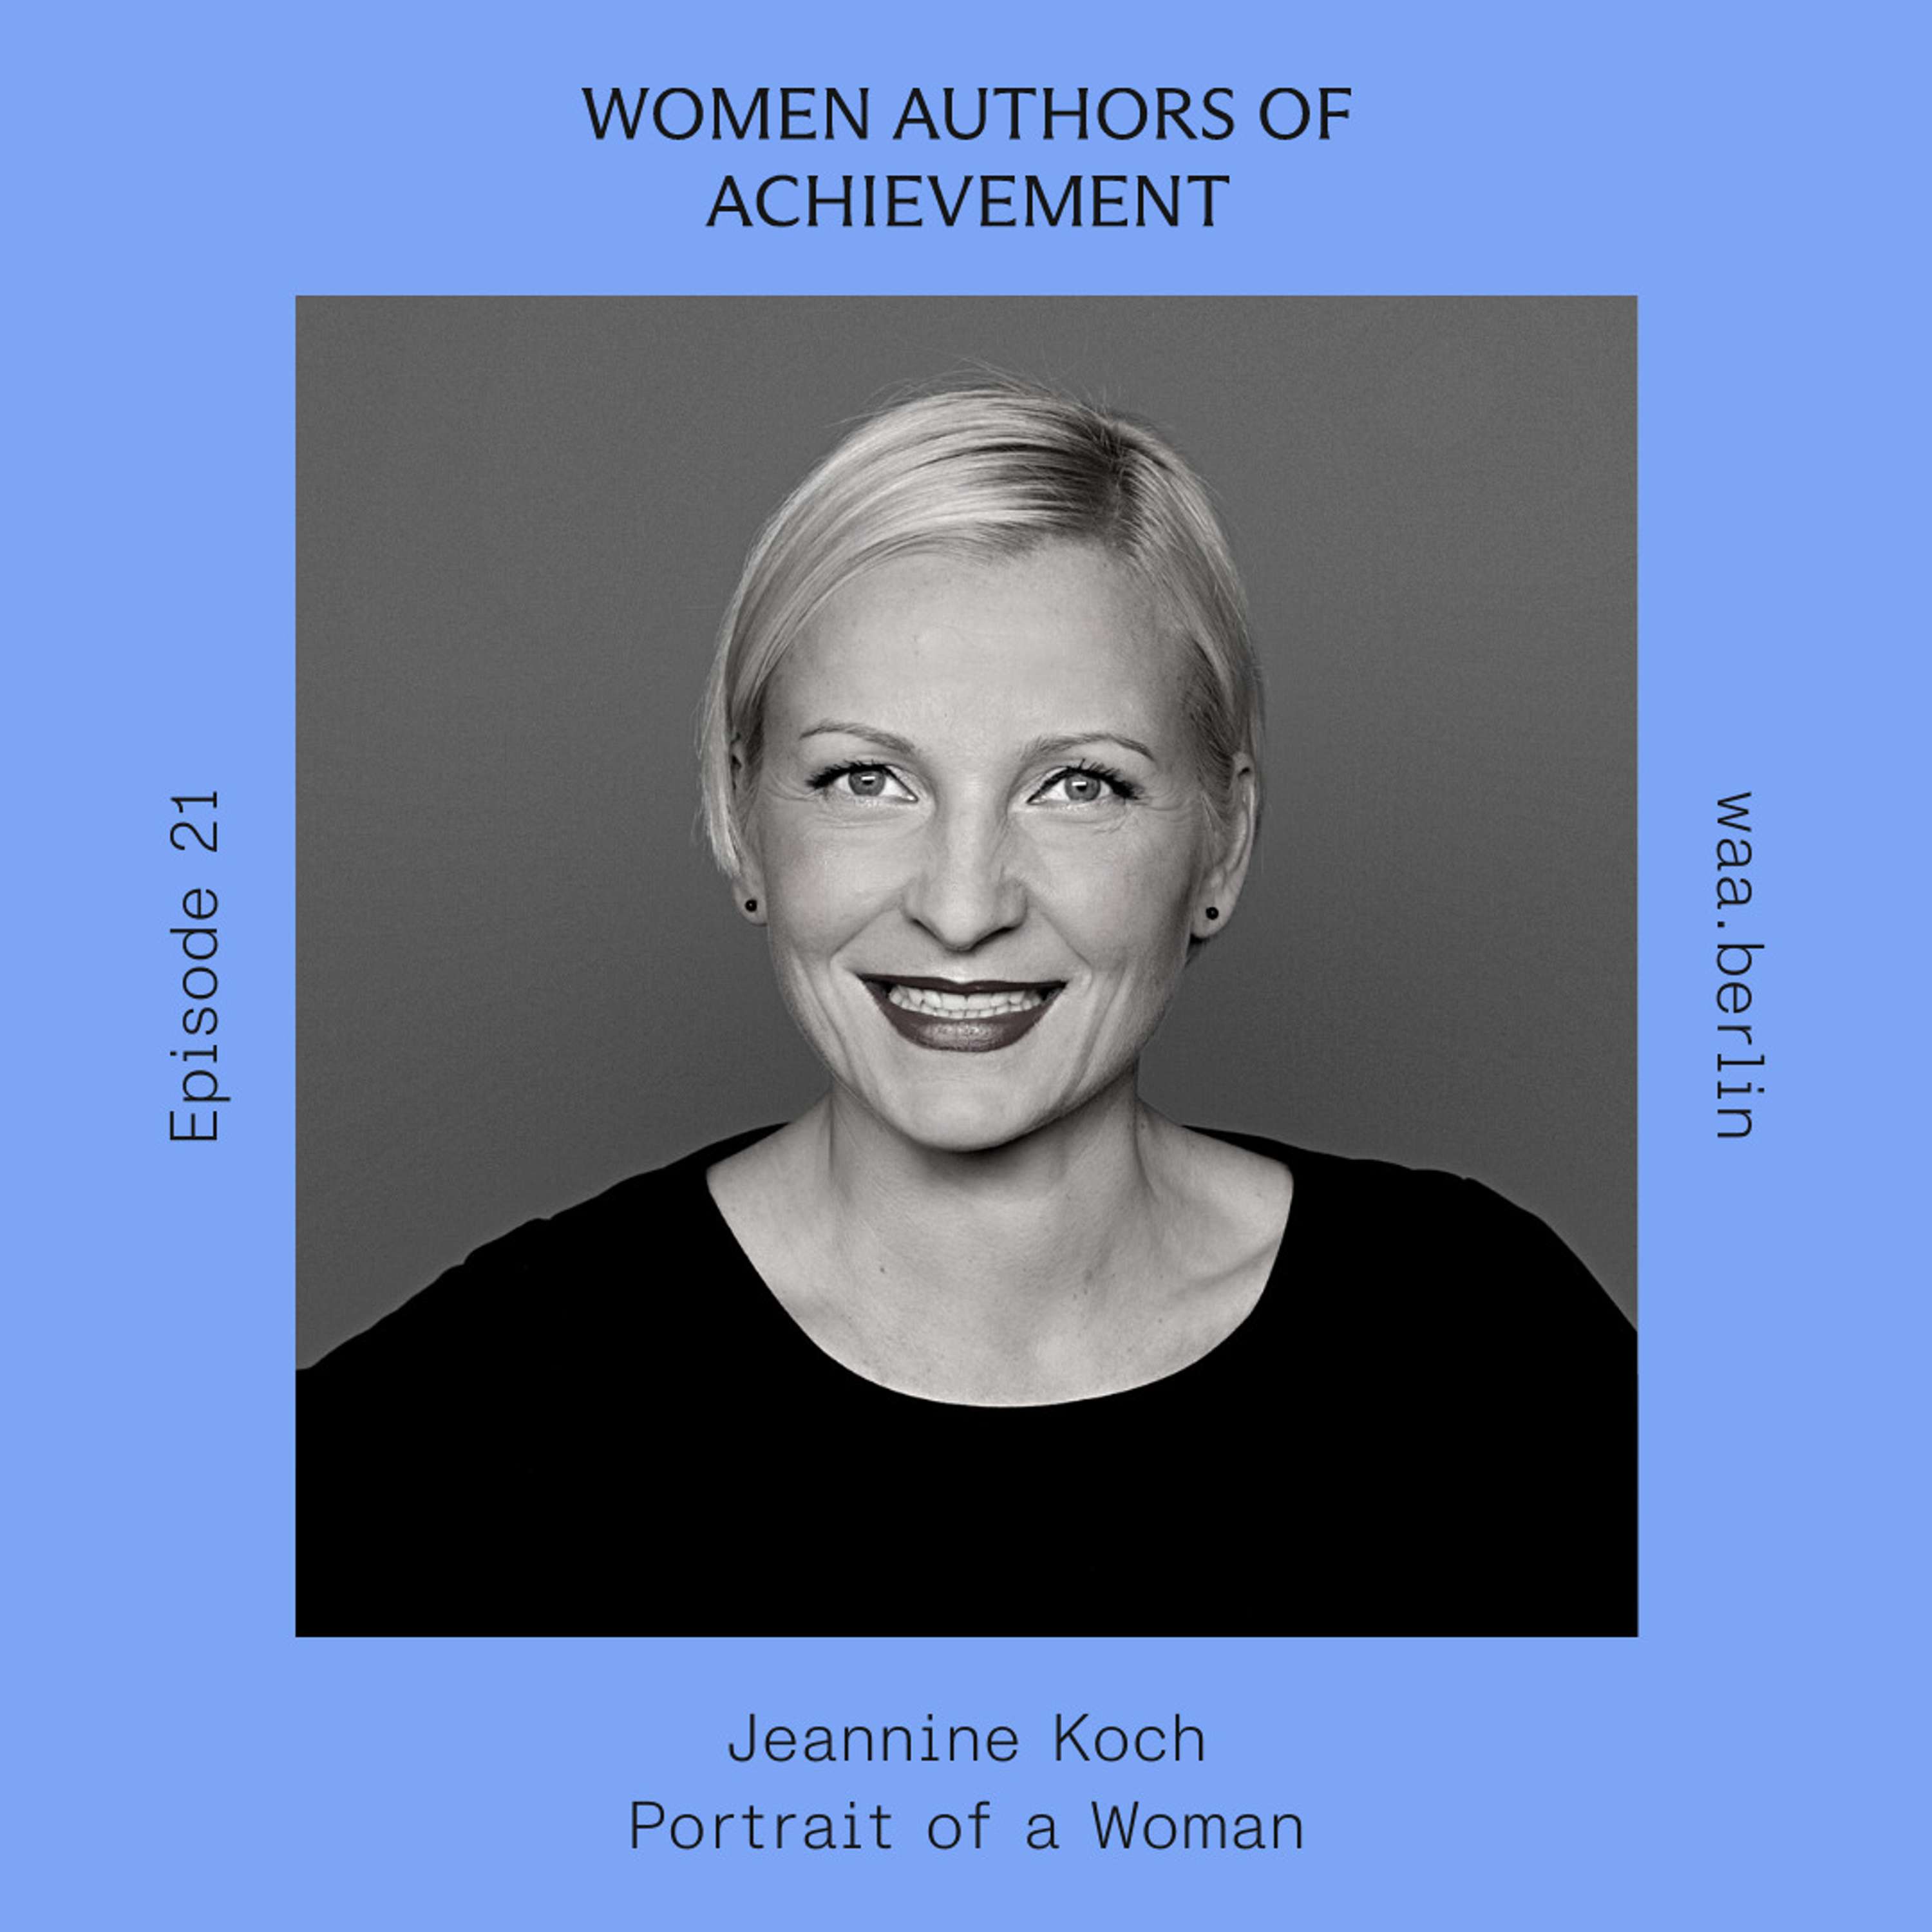 E.21 Redefining the media industry with Jeannine Koch